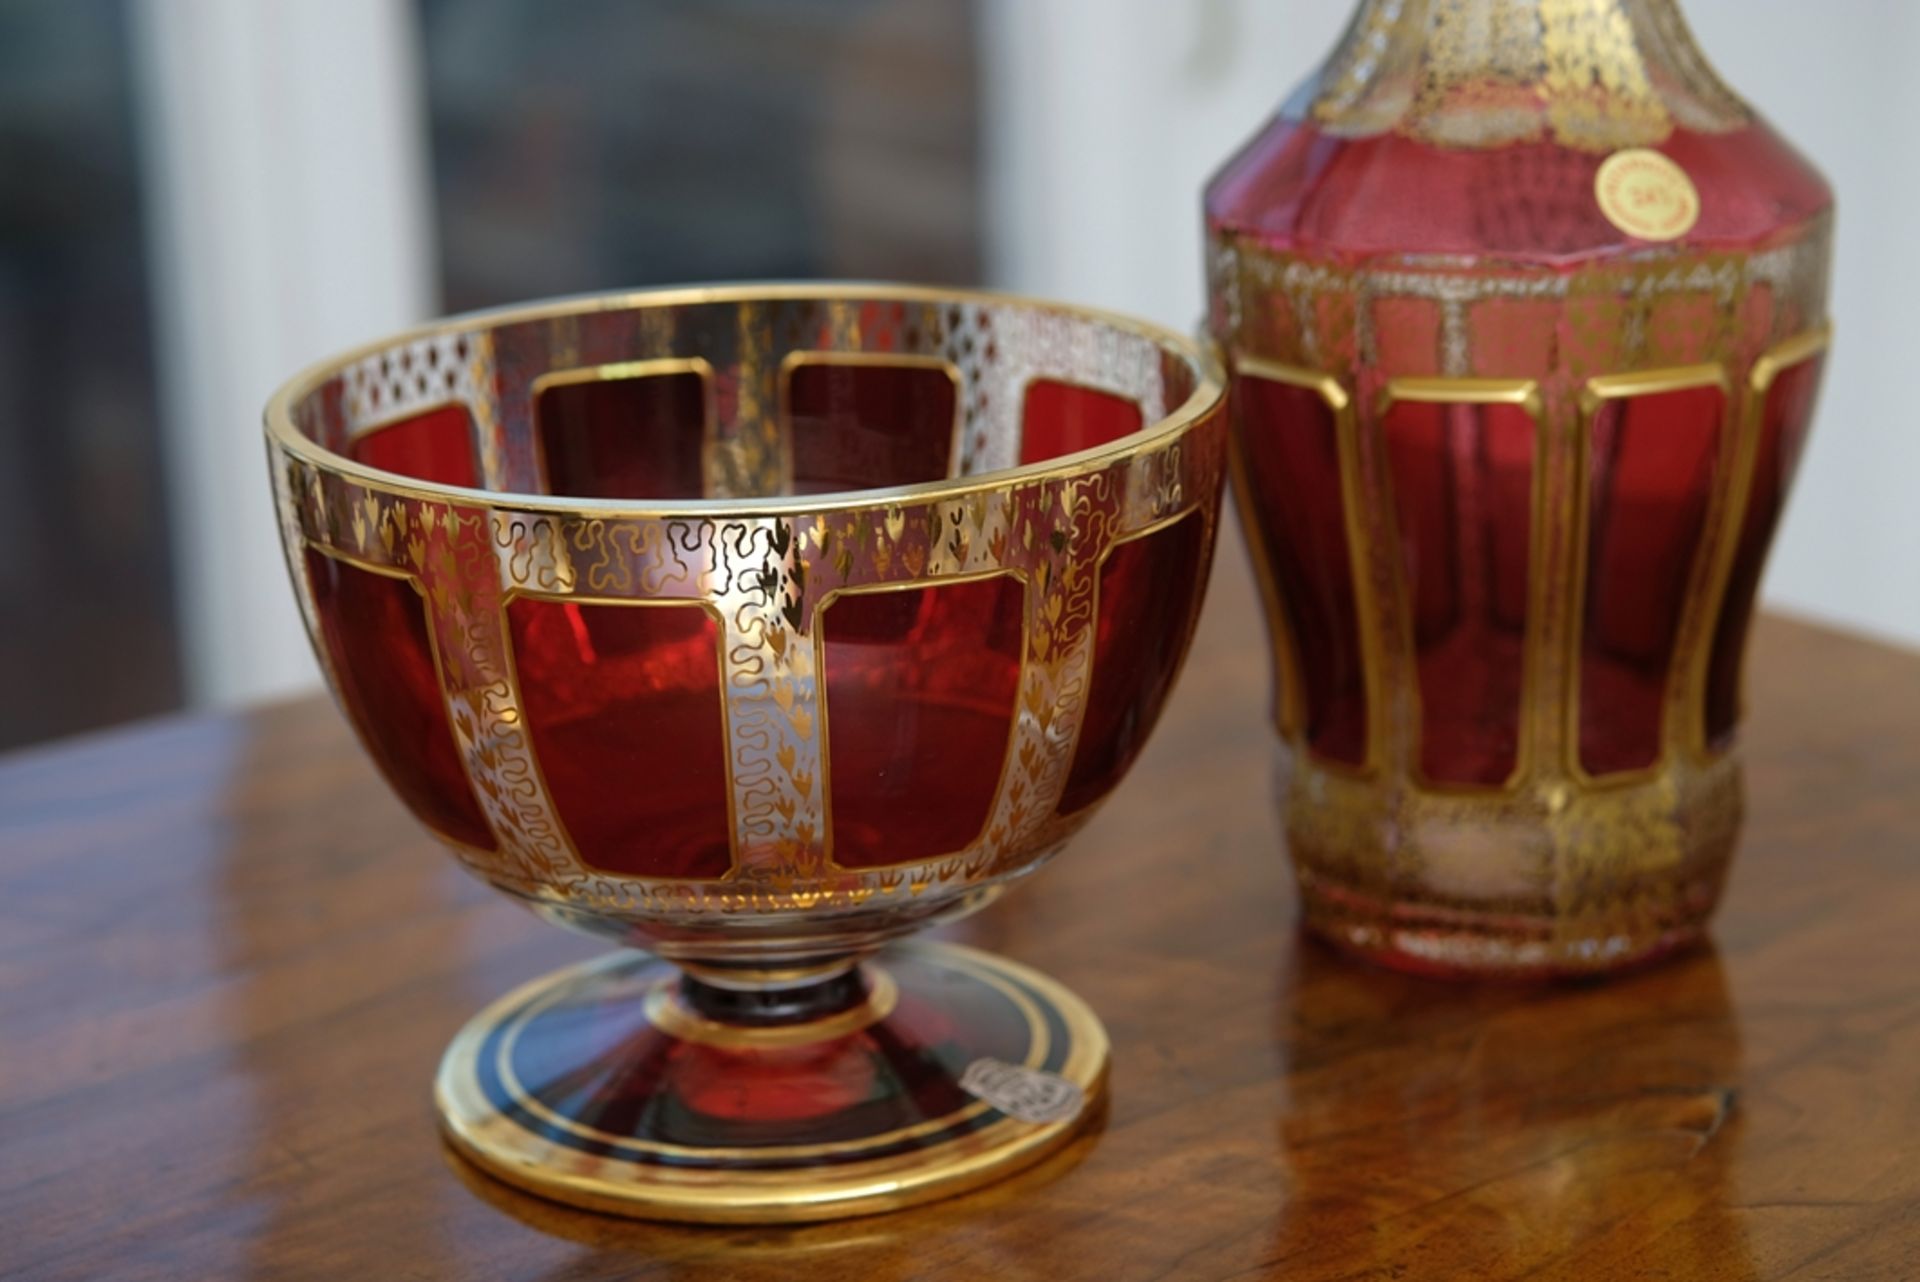 Art glass Ernst Wittig: Carafe and footed bowl made of ruby glass with gold painting. - Image 2 of 3